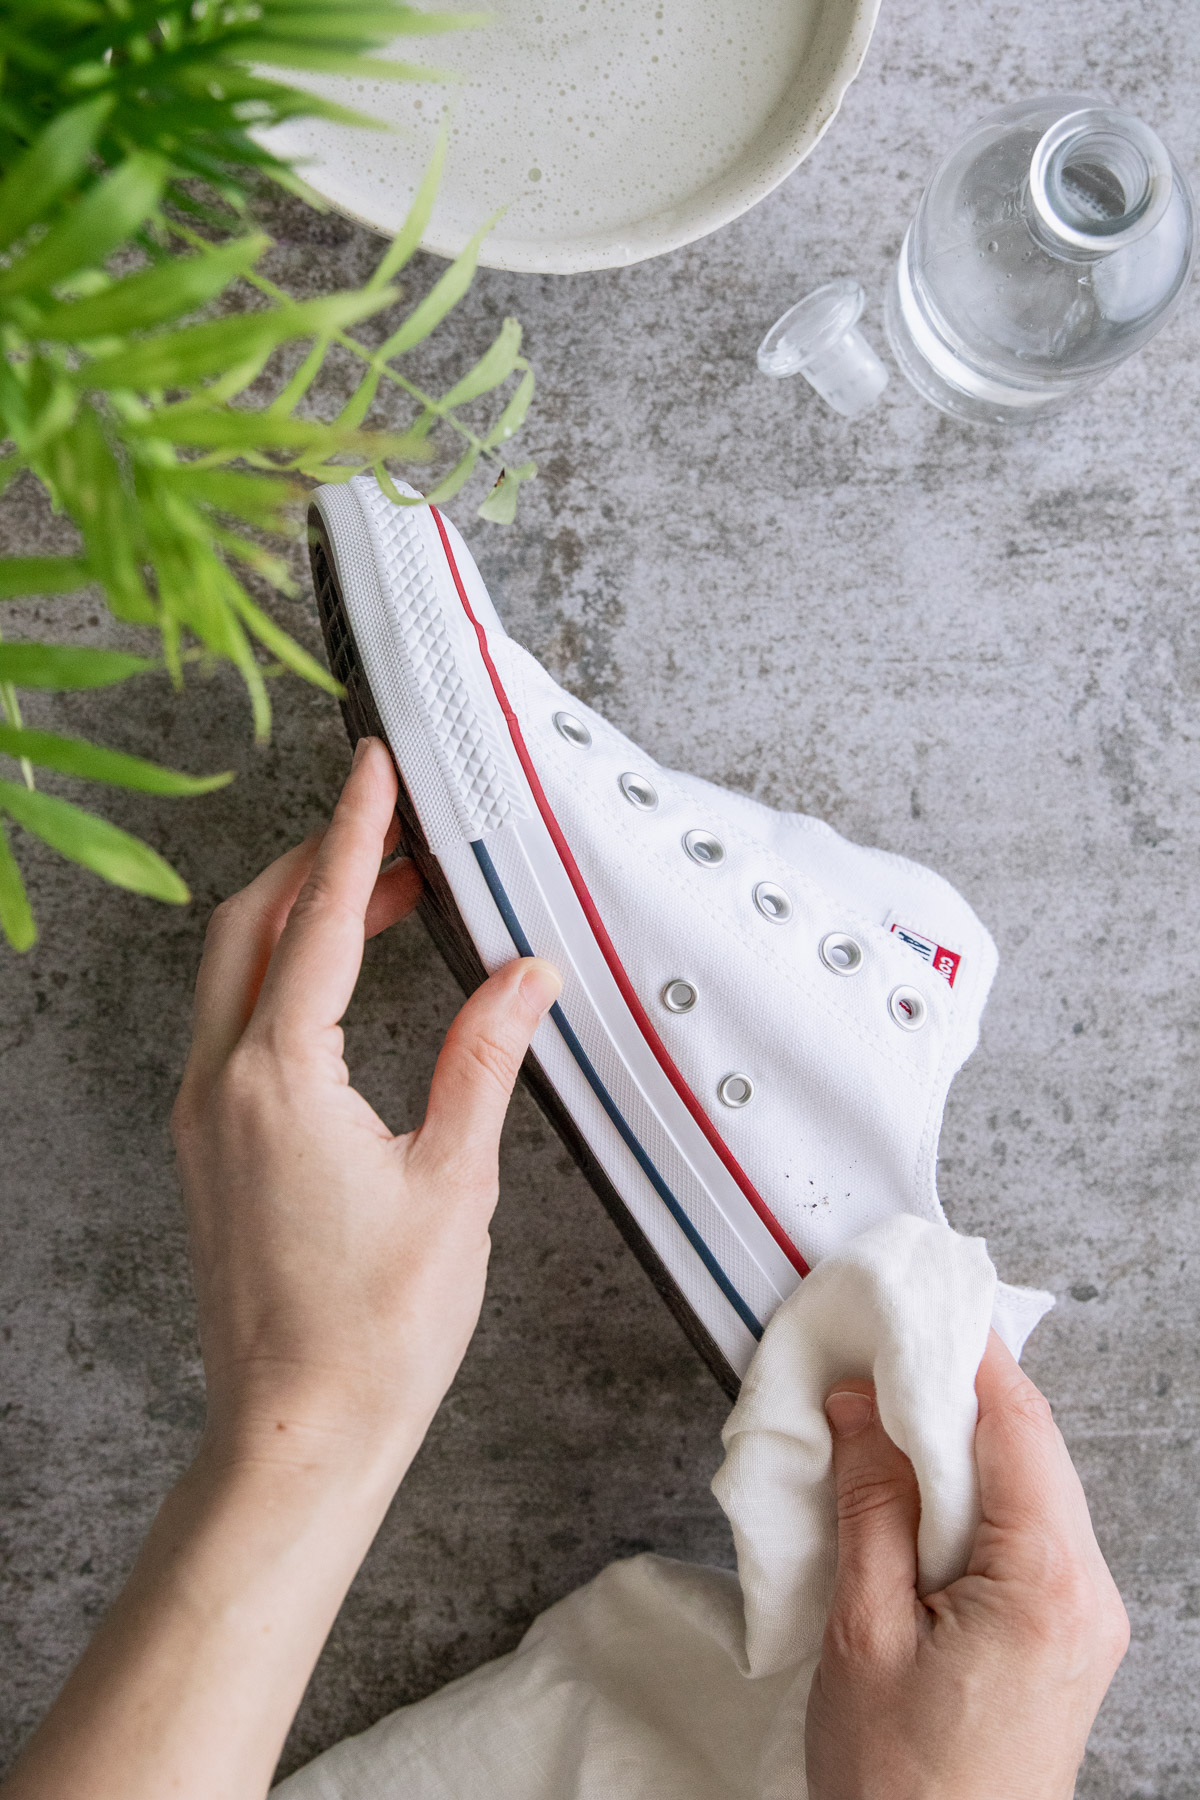 Is there anything more high maintenance than a new pair of Chucks? Here's how to clean white Converse from top to bottom in 5 simple steps.